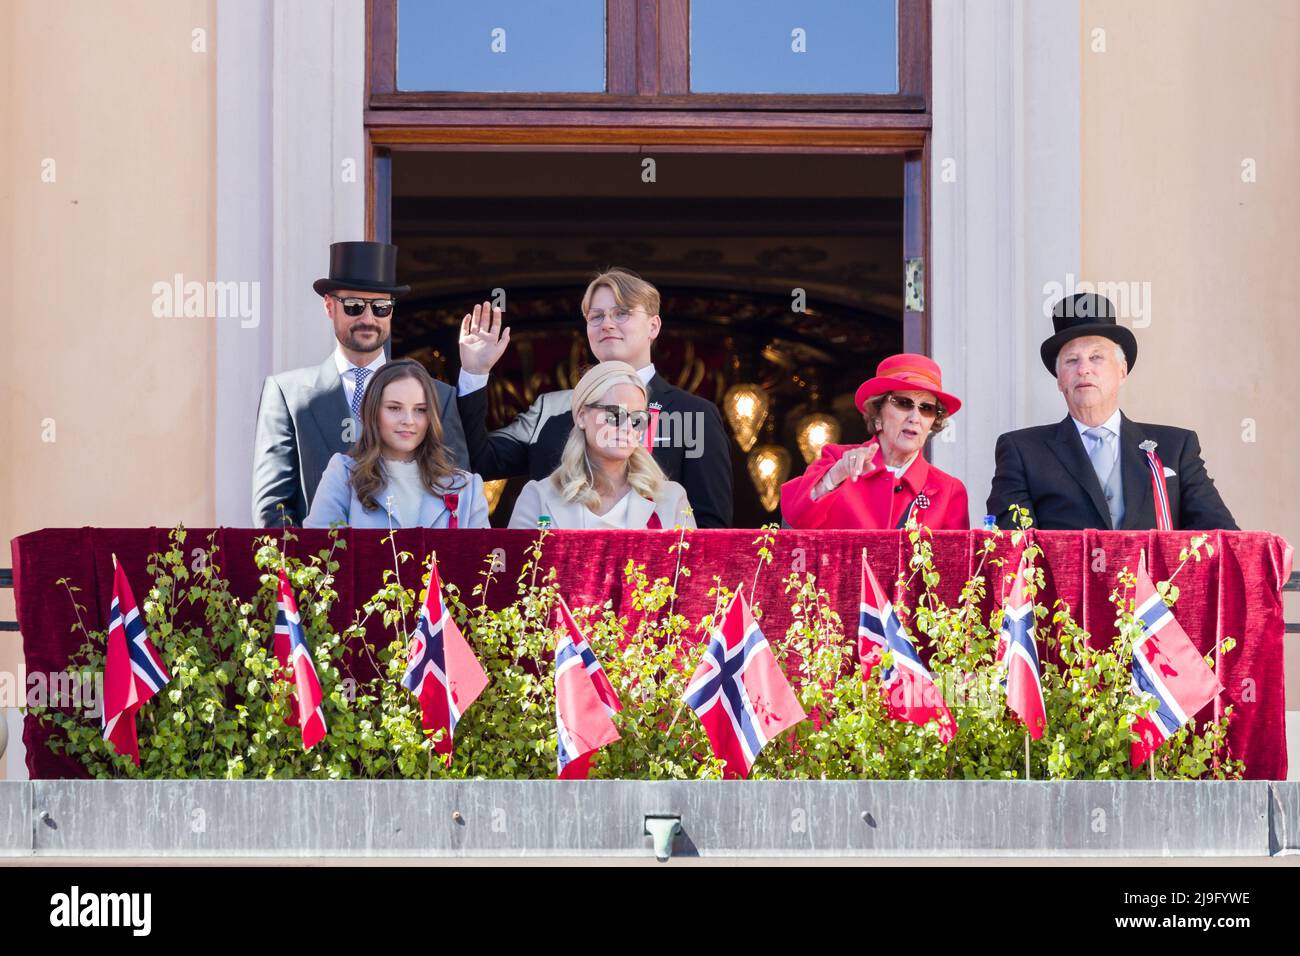 Oslo, Norway. 17th, May 2022. The Norwegian Royal Family greets the people from the Royal Palace balcony during the Norwegian Constitution Day in Oslo. (Front L-R) Princess Ingrid Alexandra, Mette-Marit, Crown Princess of Norway, Queen Sonja of Norway and King Harald V and (Back L-R) Prince Sverre Magnus of Norway and Haakon, Crown Prince of Norway,. (Photo credit: Gonzales Photo - Stian S. Moller). Stock Photo